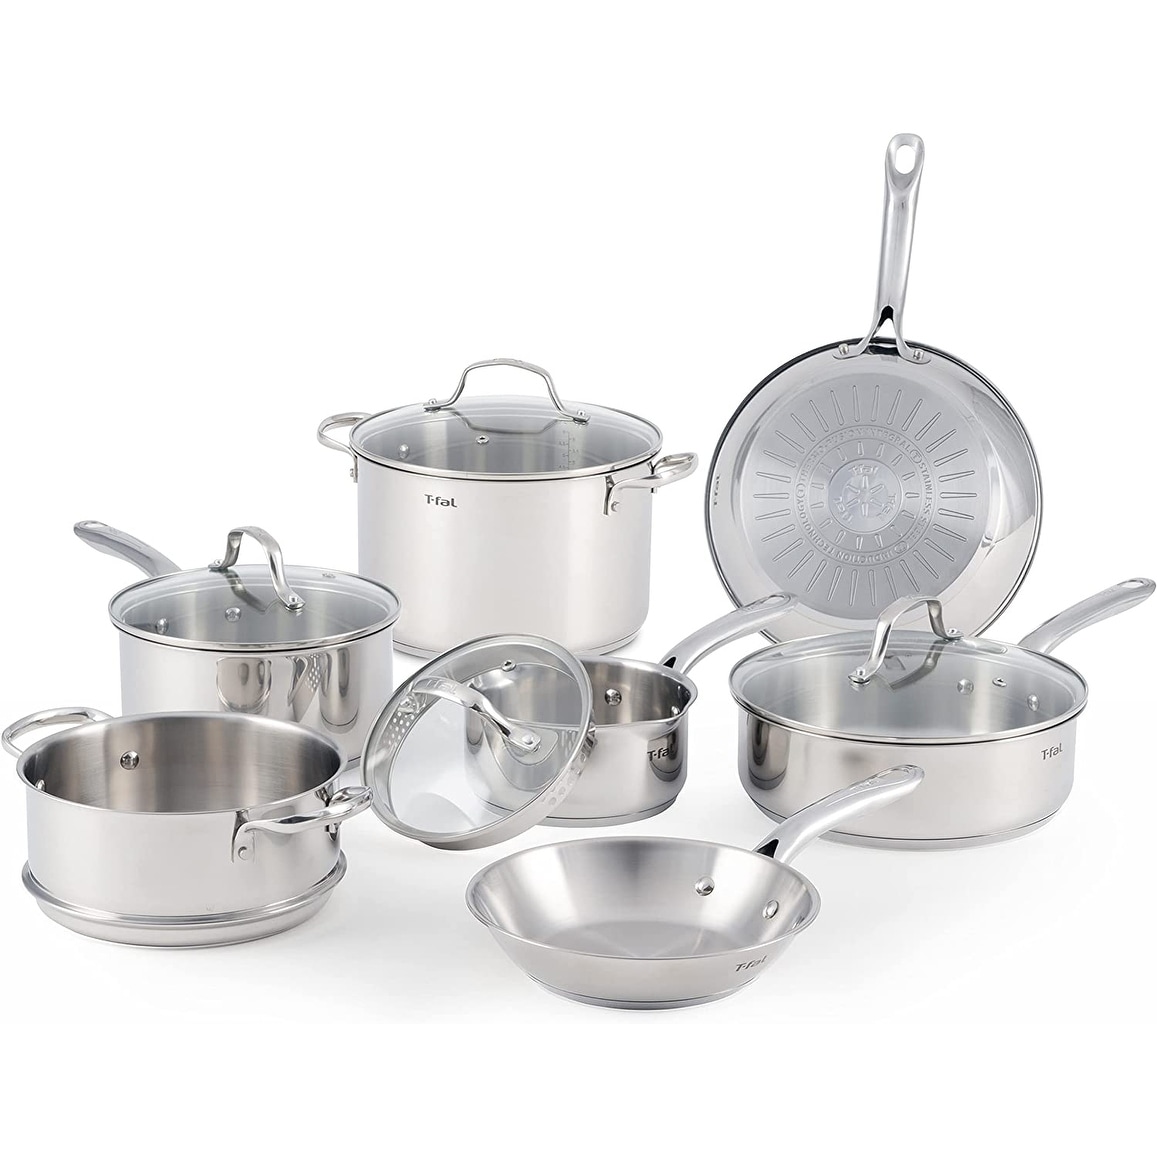 https://ak1.ostkcdn.com/images/products/is/images/direct/25ad456b6efa09c3d8bd5e06249263c6117de792/Ultimate-Stainless-Steel-and-Copper-Cookware-Set-13-PIece-Induction-Pots-and-Pans%2C-Dishwasher-Safe-Silver.jpg